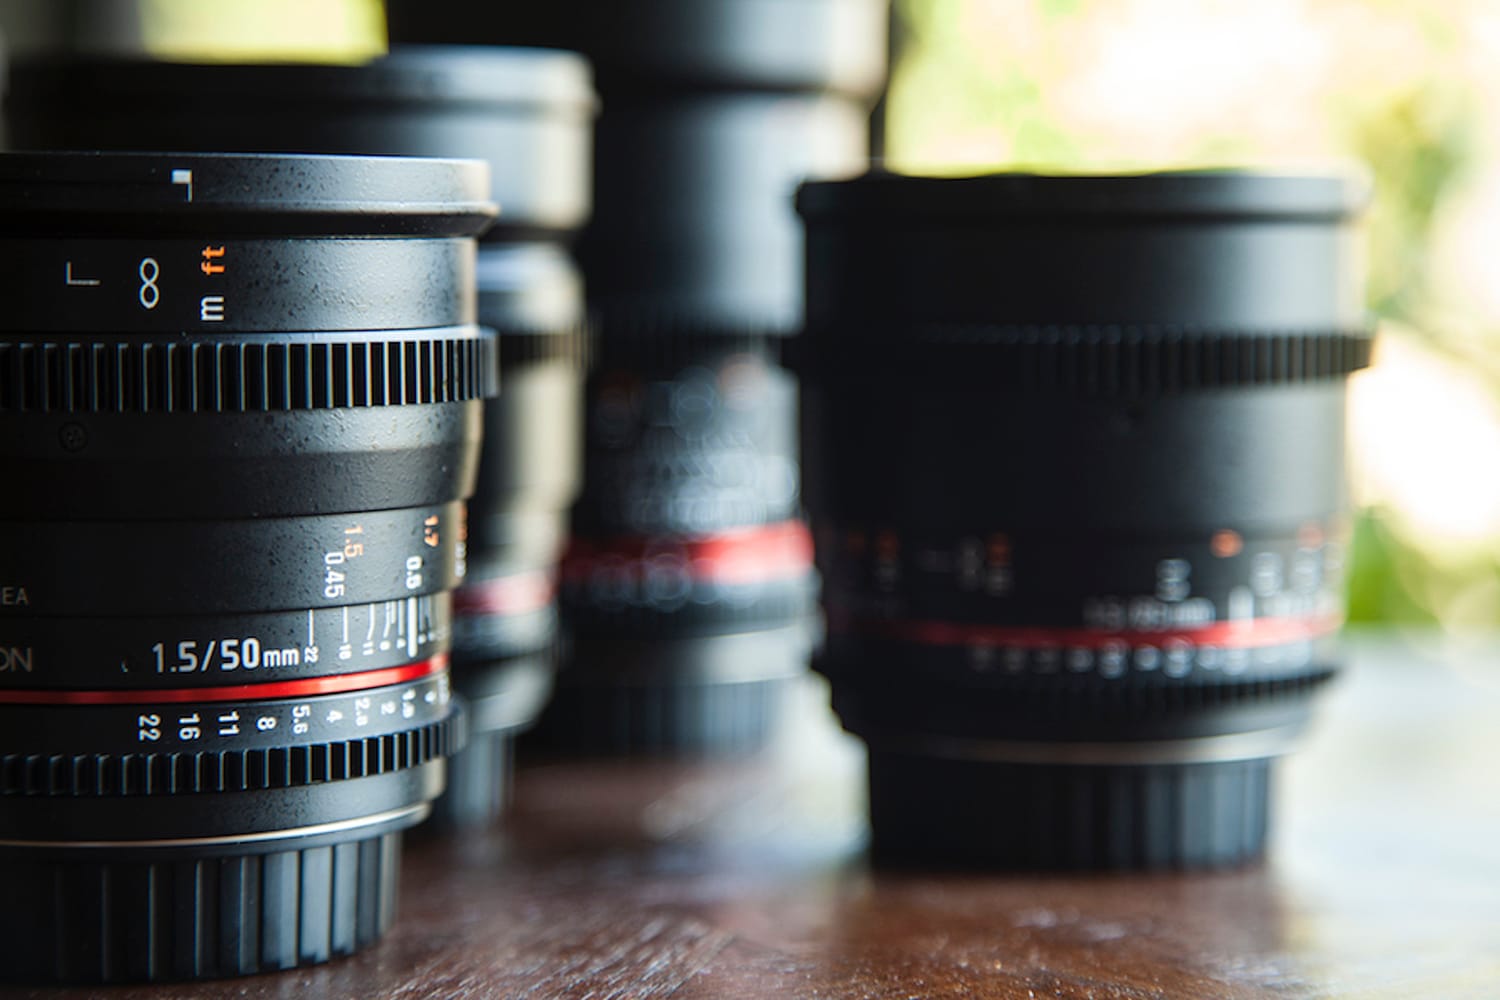 Lenses Allow You to Specialize Your Photography